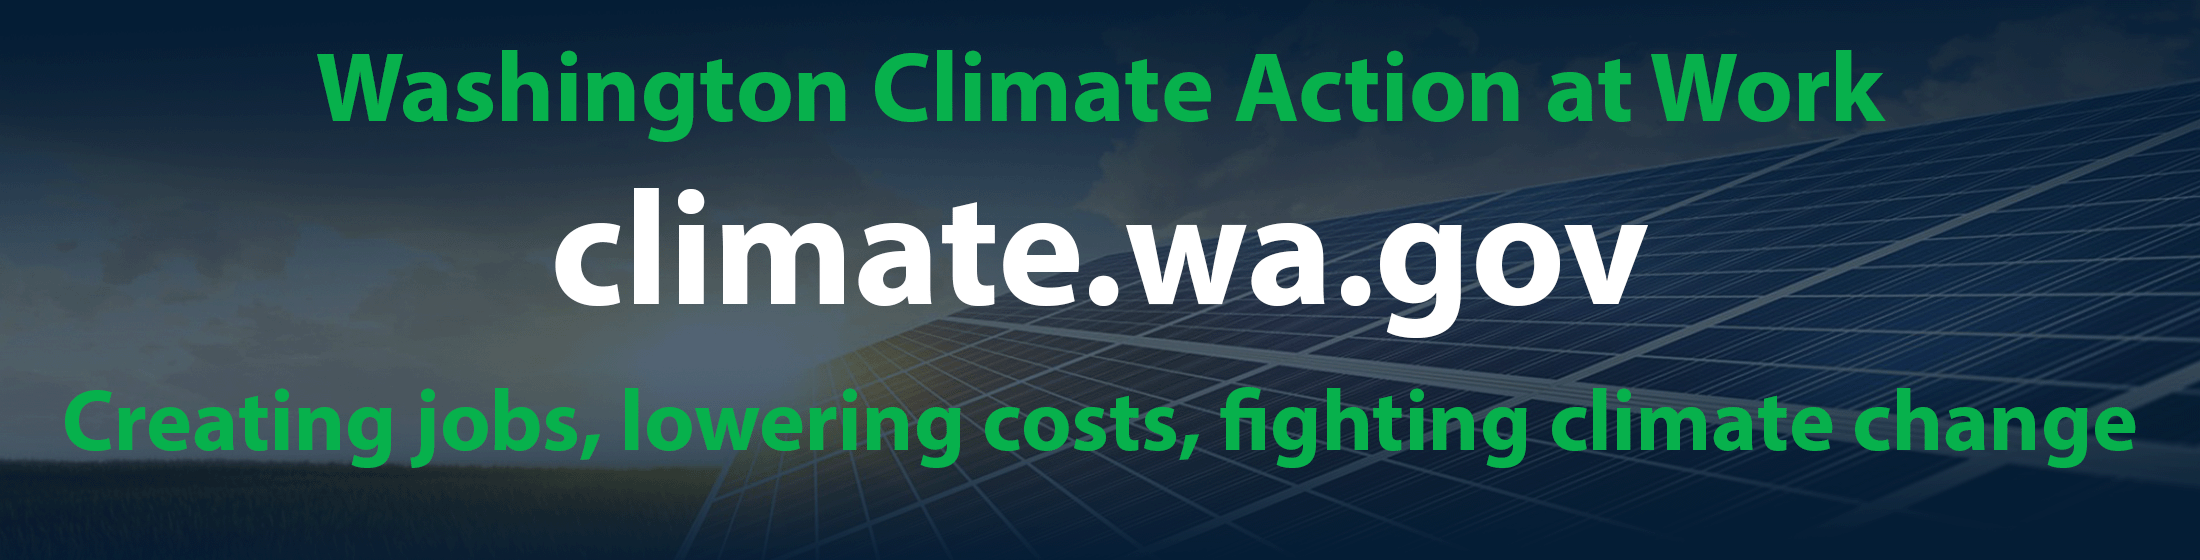 Washington Climate Action at Work - climate.wa.gov - Creating jobs, lowering costs, fighting climate change